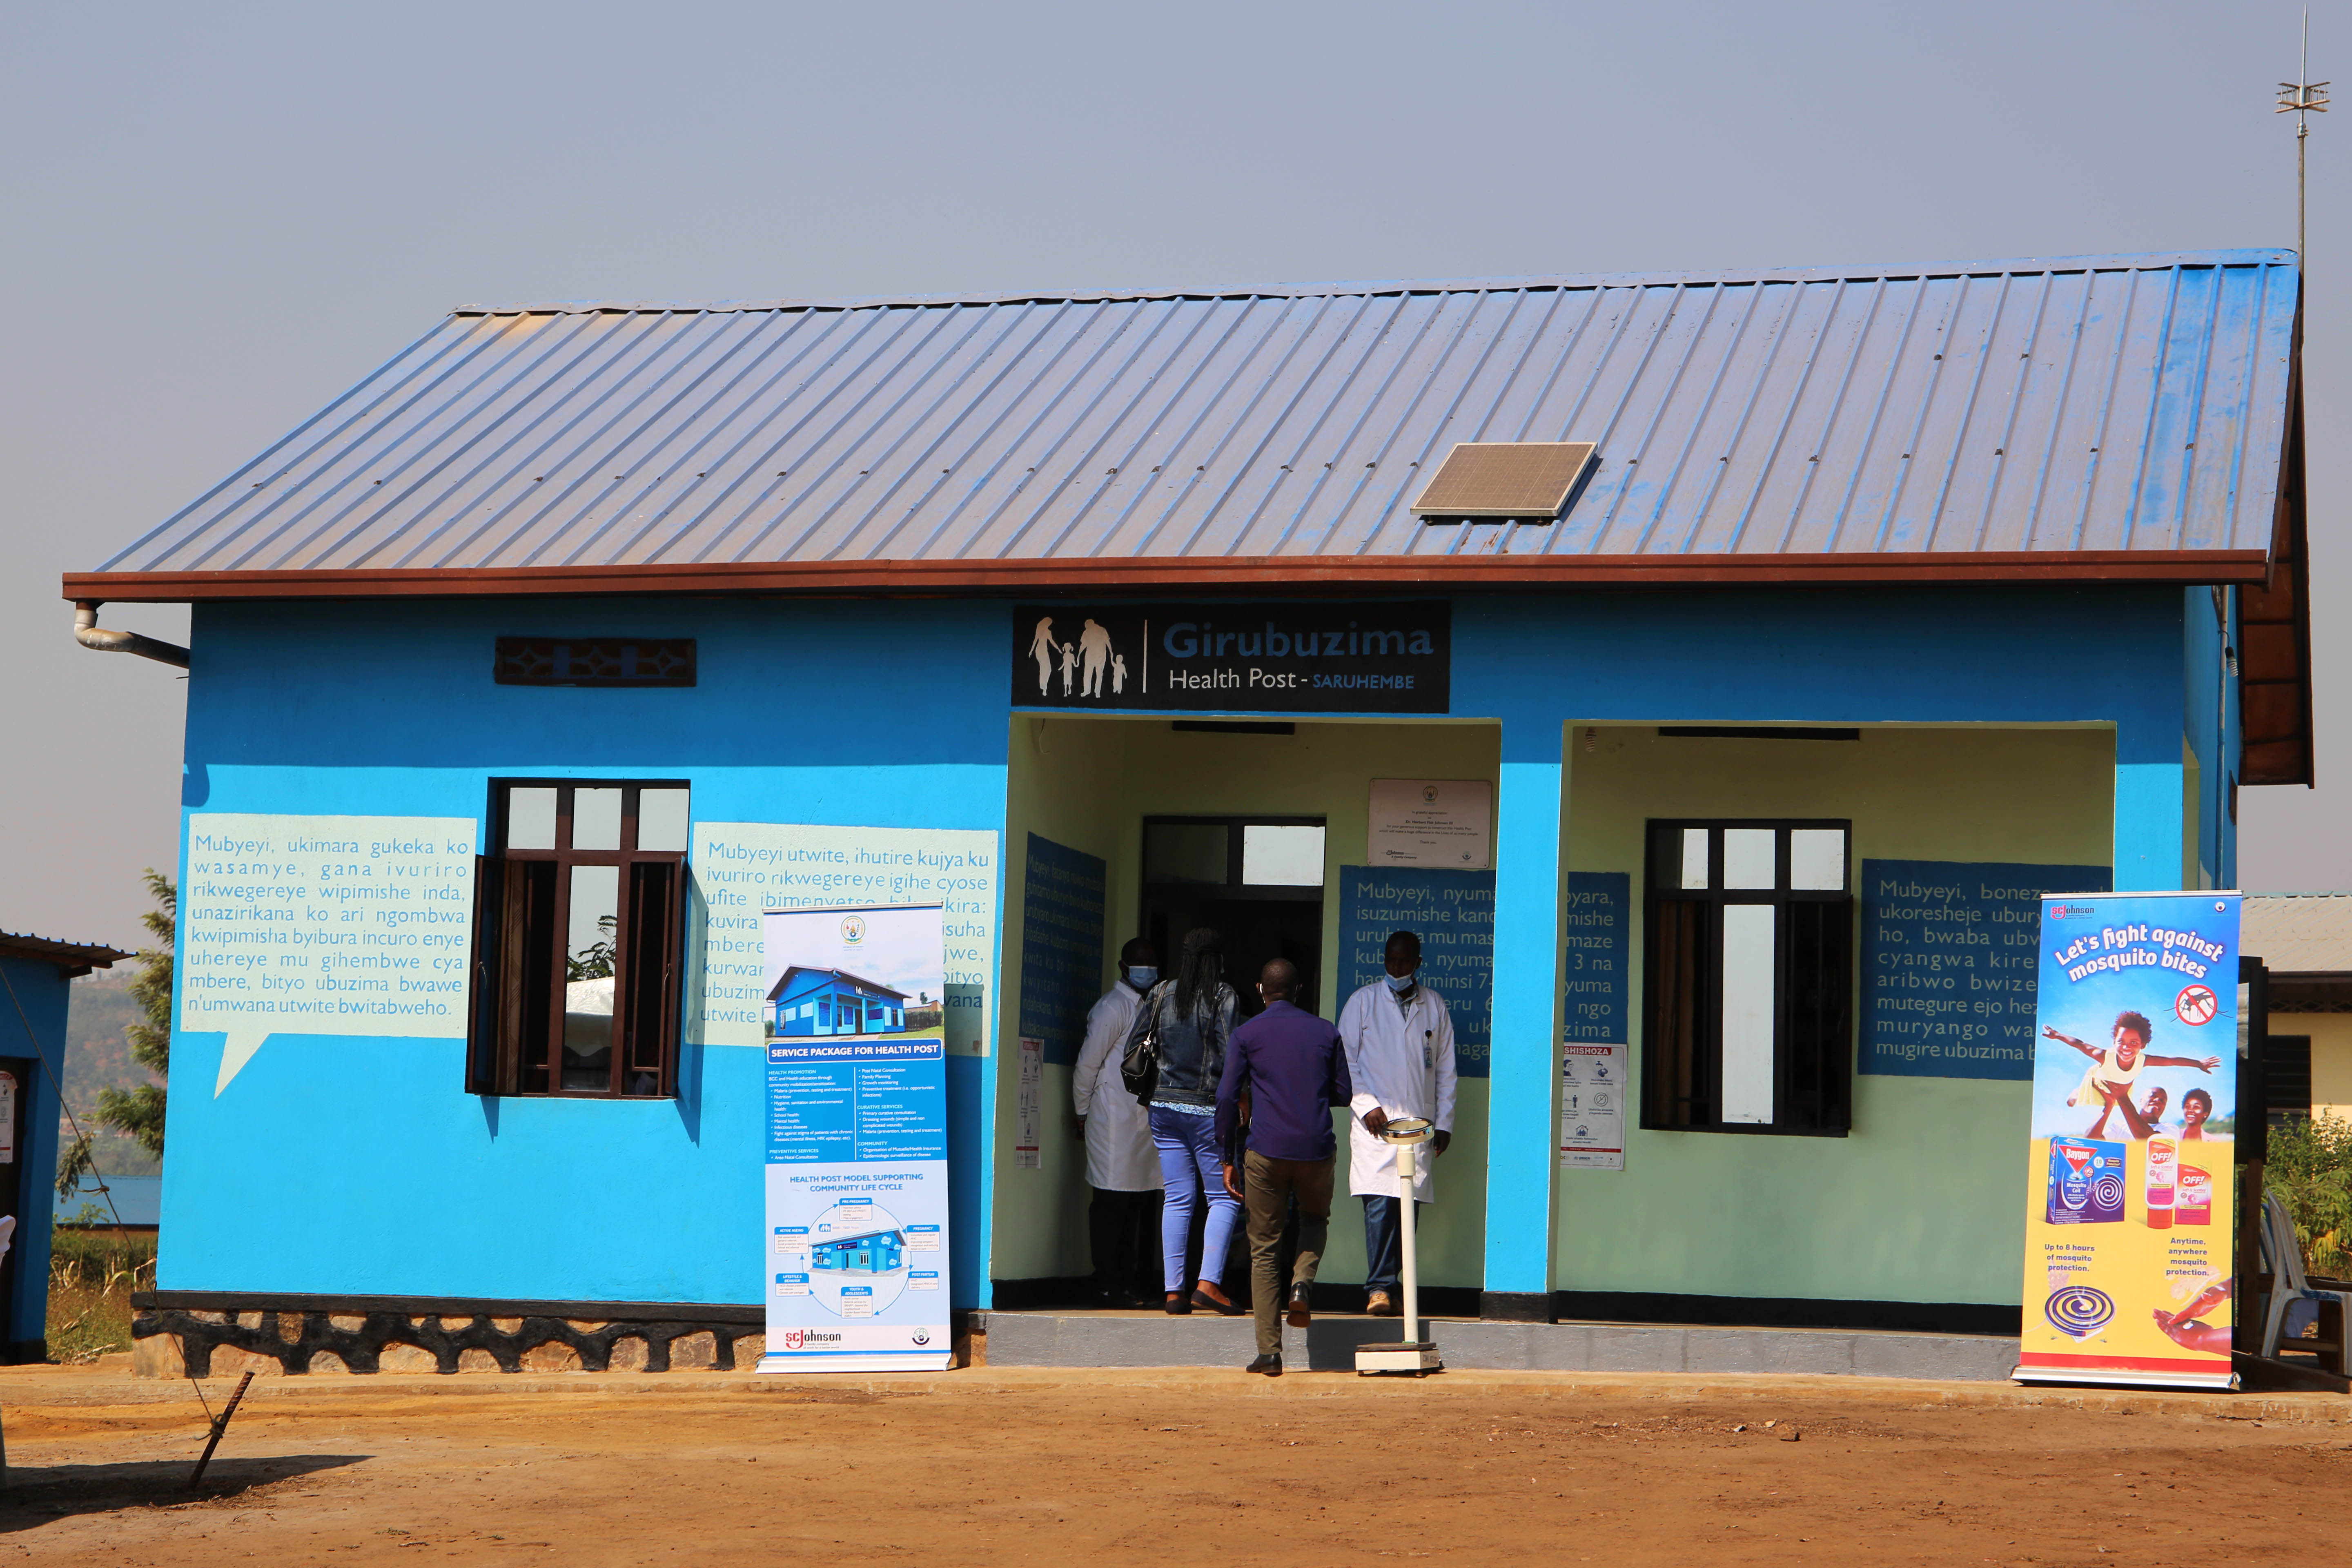 Seruhembe Health Post in Mahama Sector built with support from S.C Johnson Inc during its inauguration in June 27. 